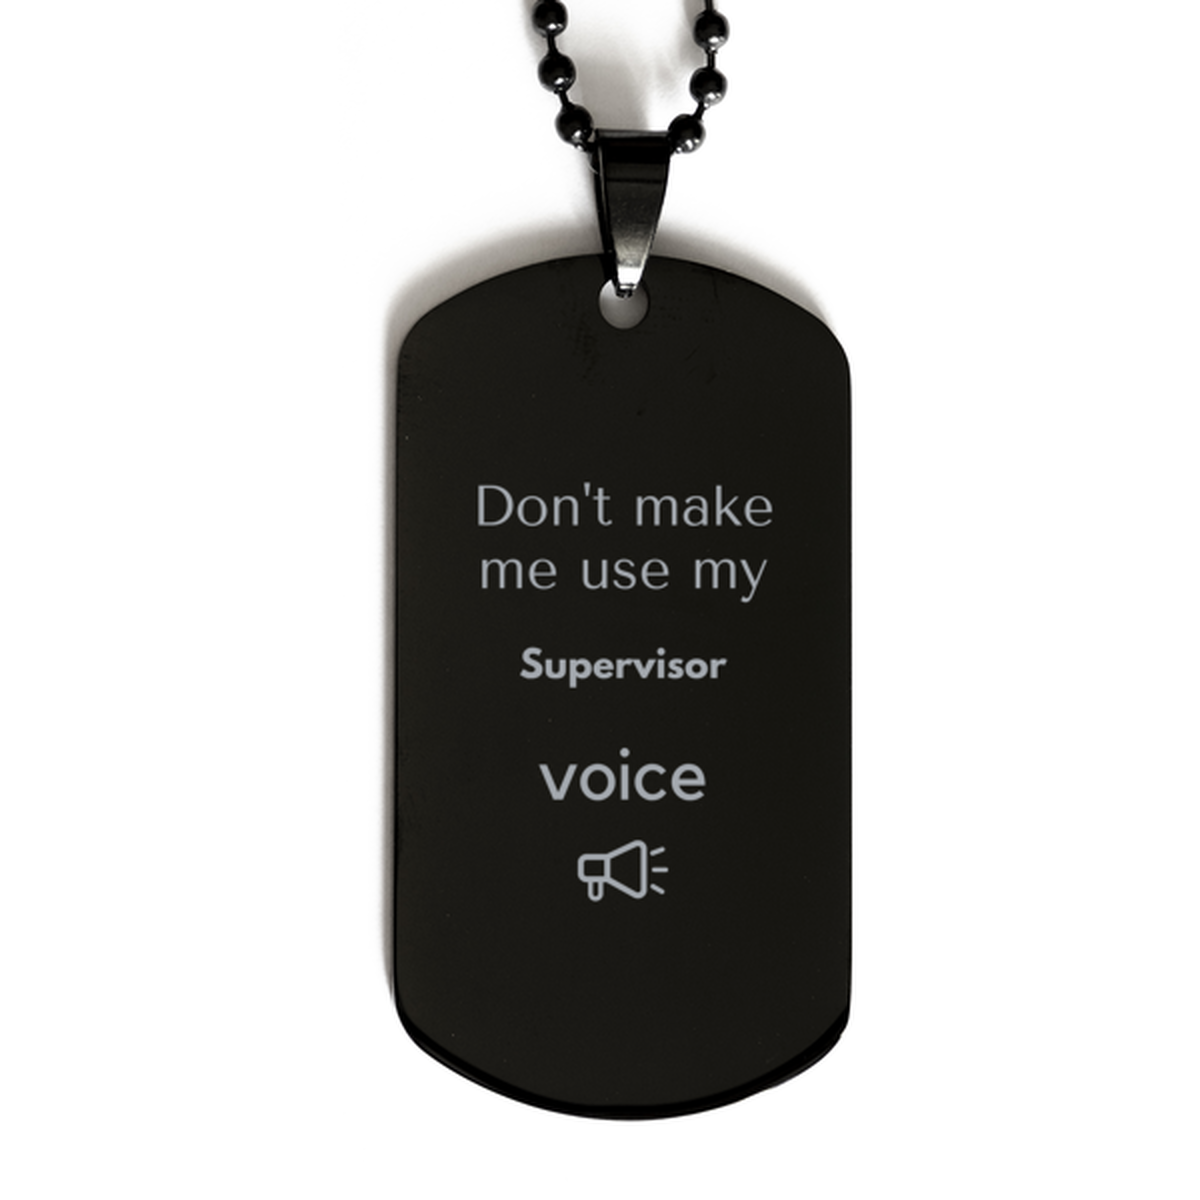 Don't make me use my Supervisor voice, Sarcasm Supervisor Gifts, Christmas Supervisor Black Dog Tag Birthday Unique Gifts For Supervisor Coworkers, Men, Women, Colleague, Friends